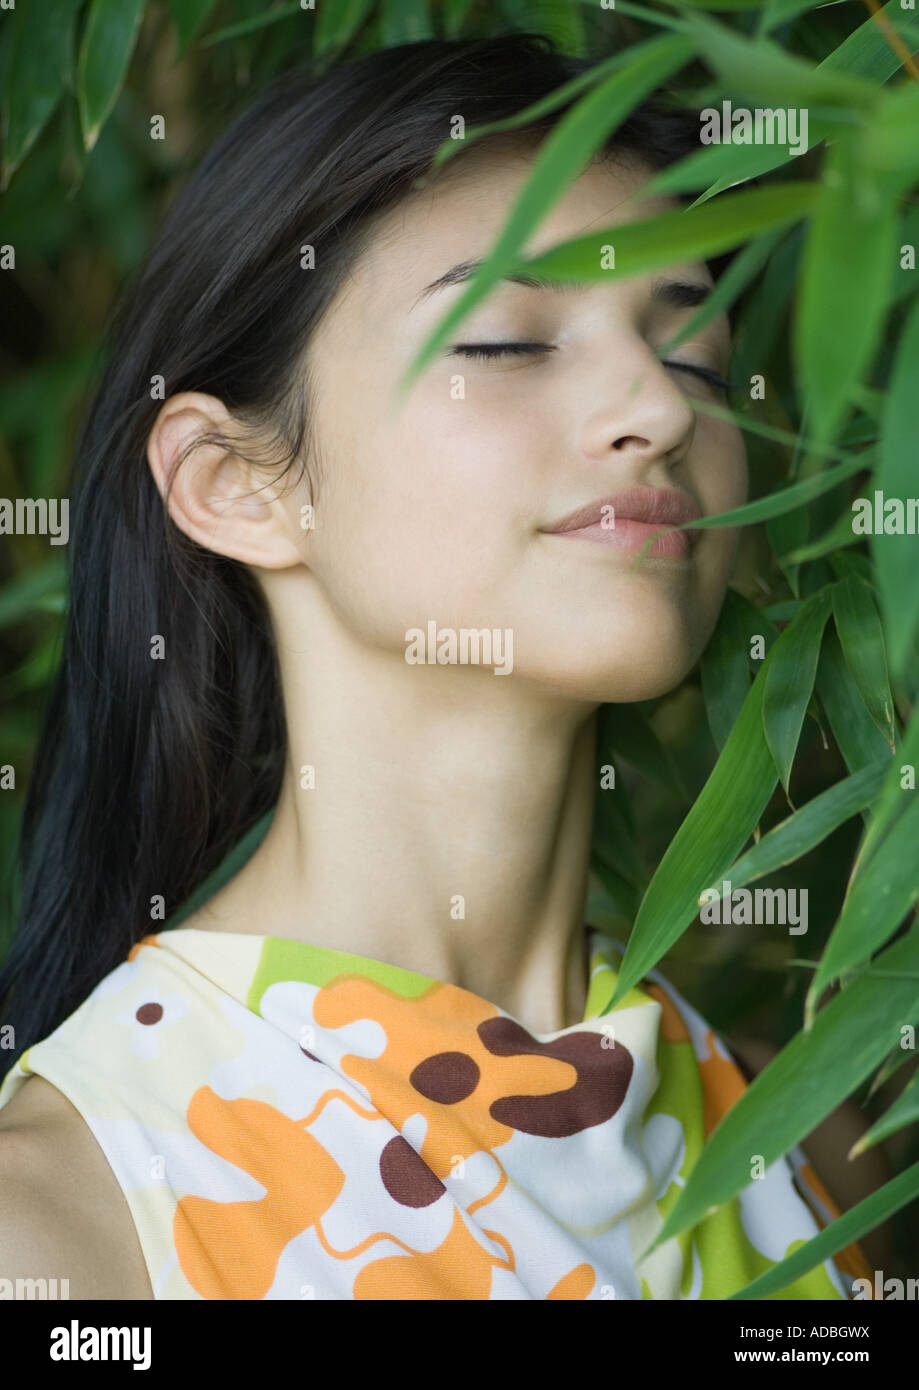 Woman standing in lush foliage, eyes closed, smiling Stock Photo